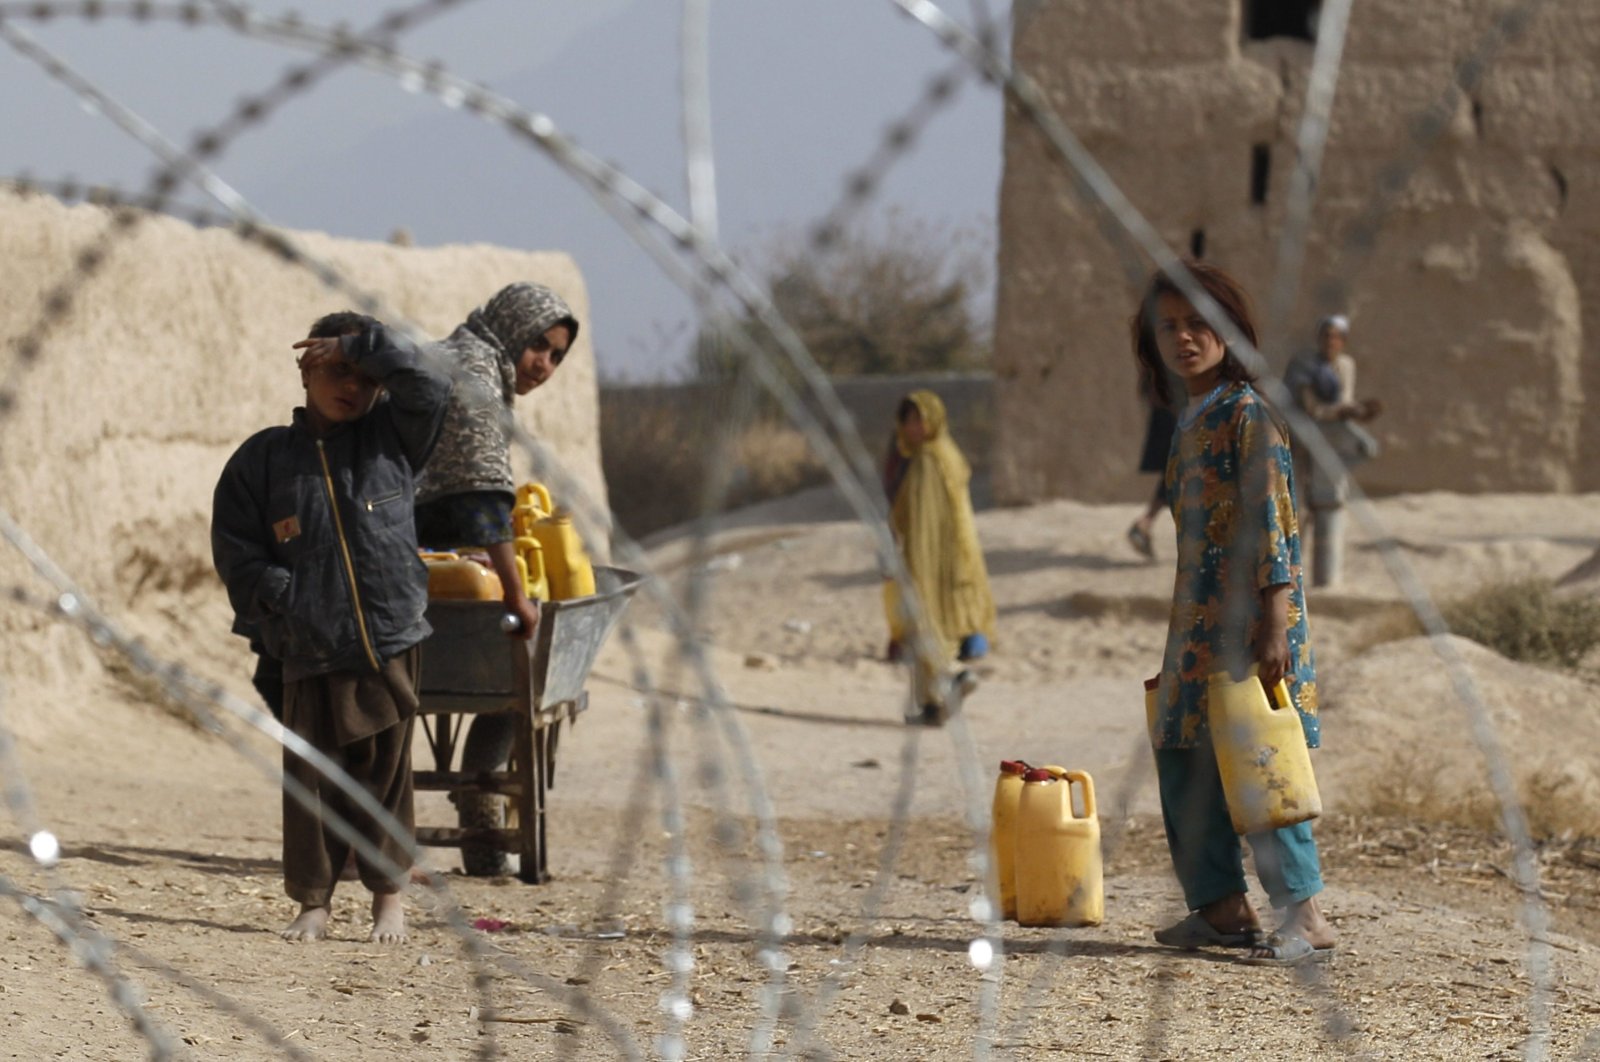 Afghan children look from behind a razor wire at an outpost in Zhari district, Kandahar Province, Nov. 20, 2010. (REUTERS Photo)